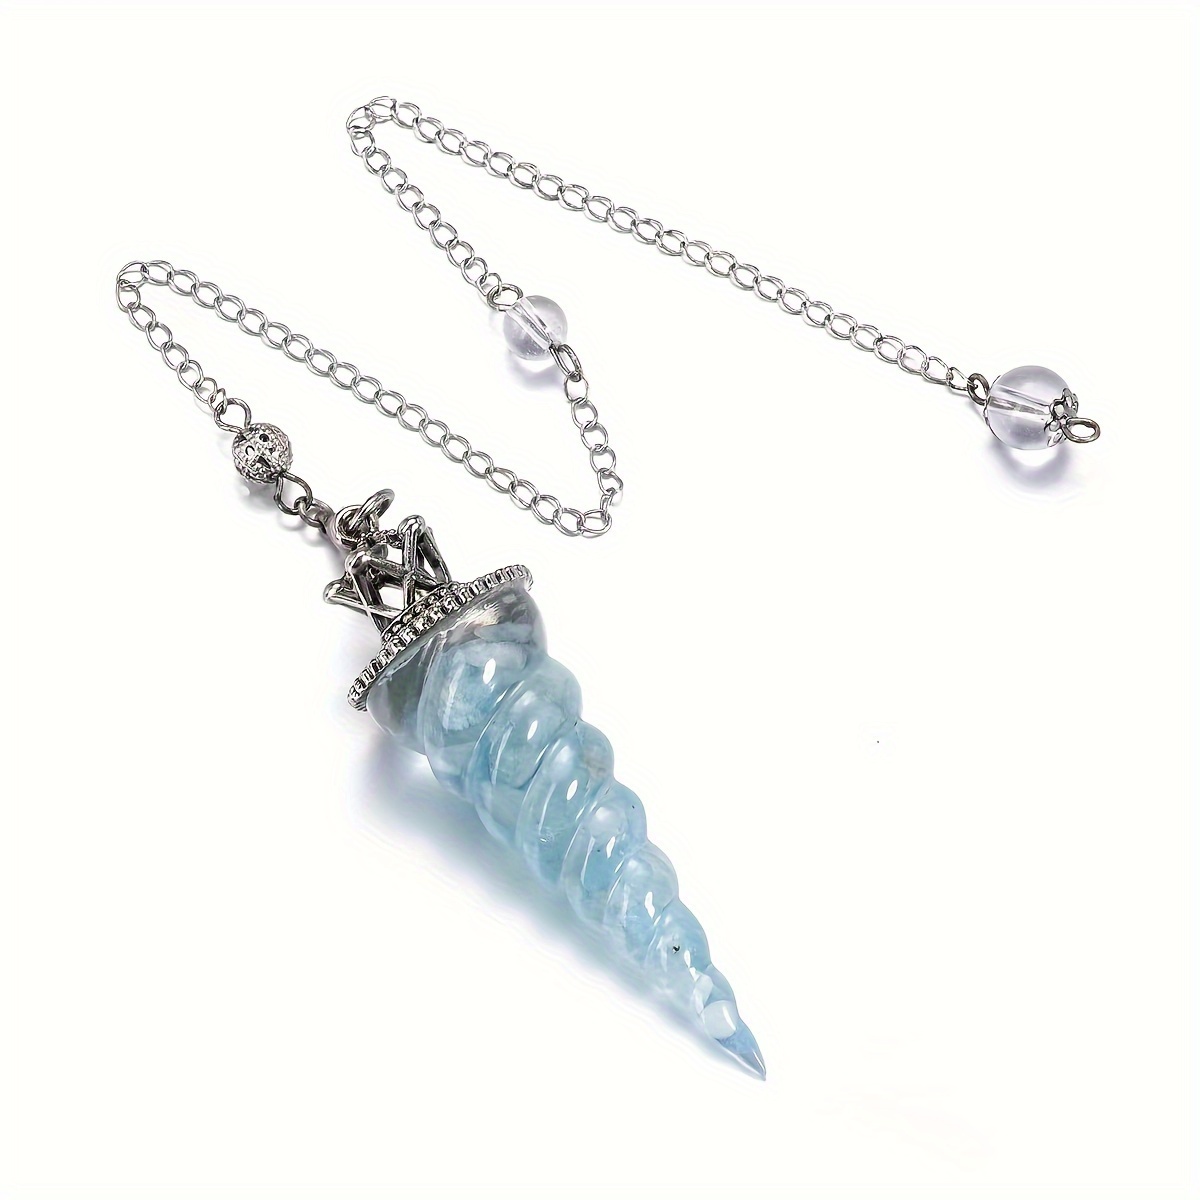 Witchcraft Pendulum Necklace, Wicca Crystal Pendant